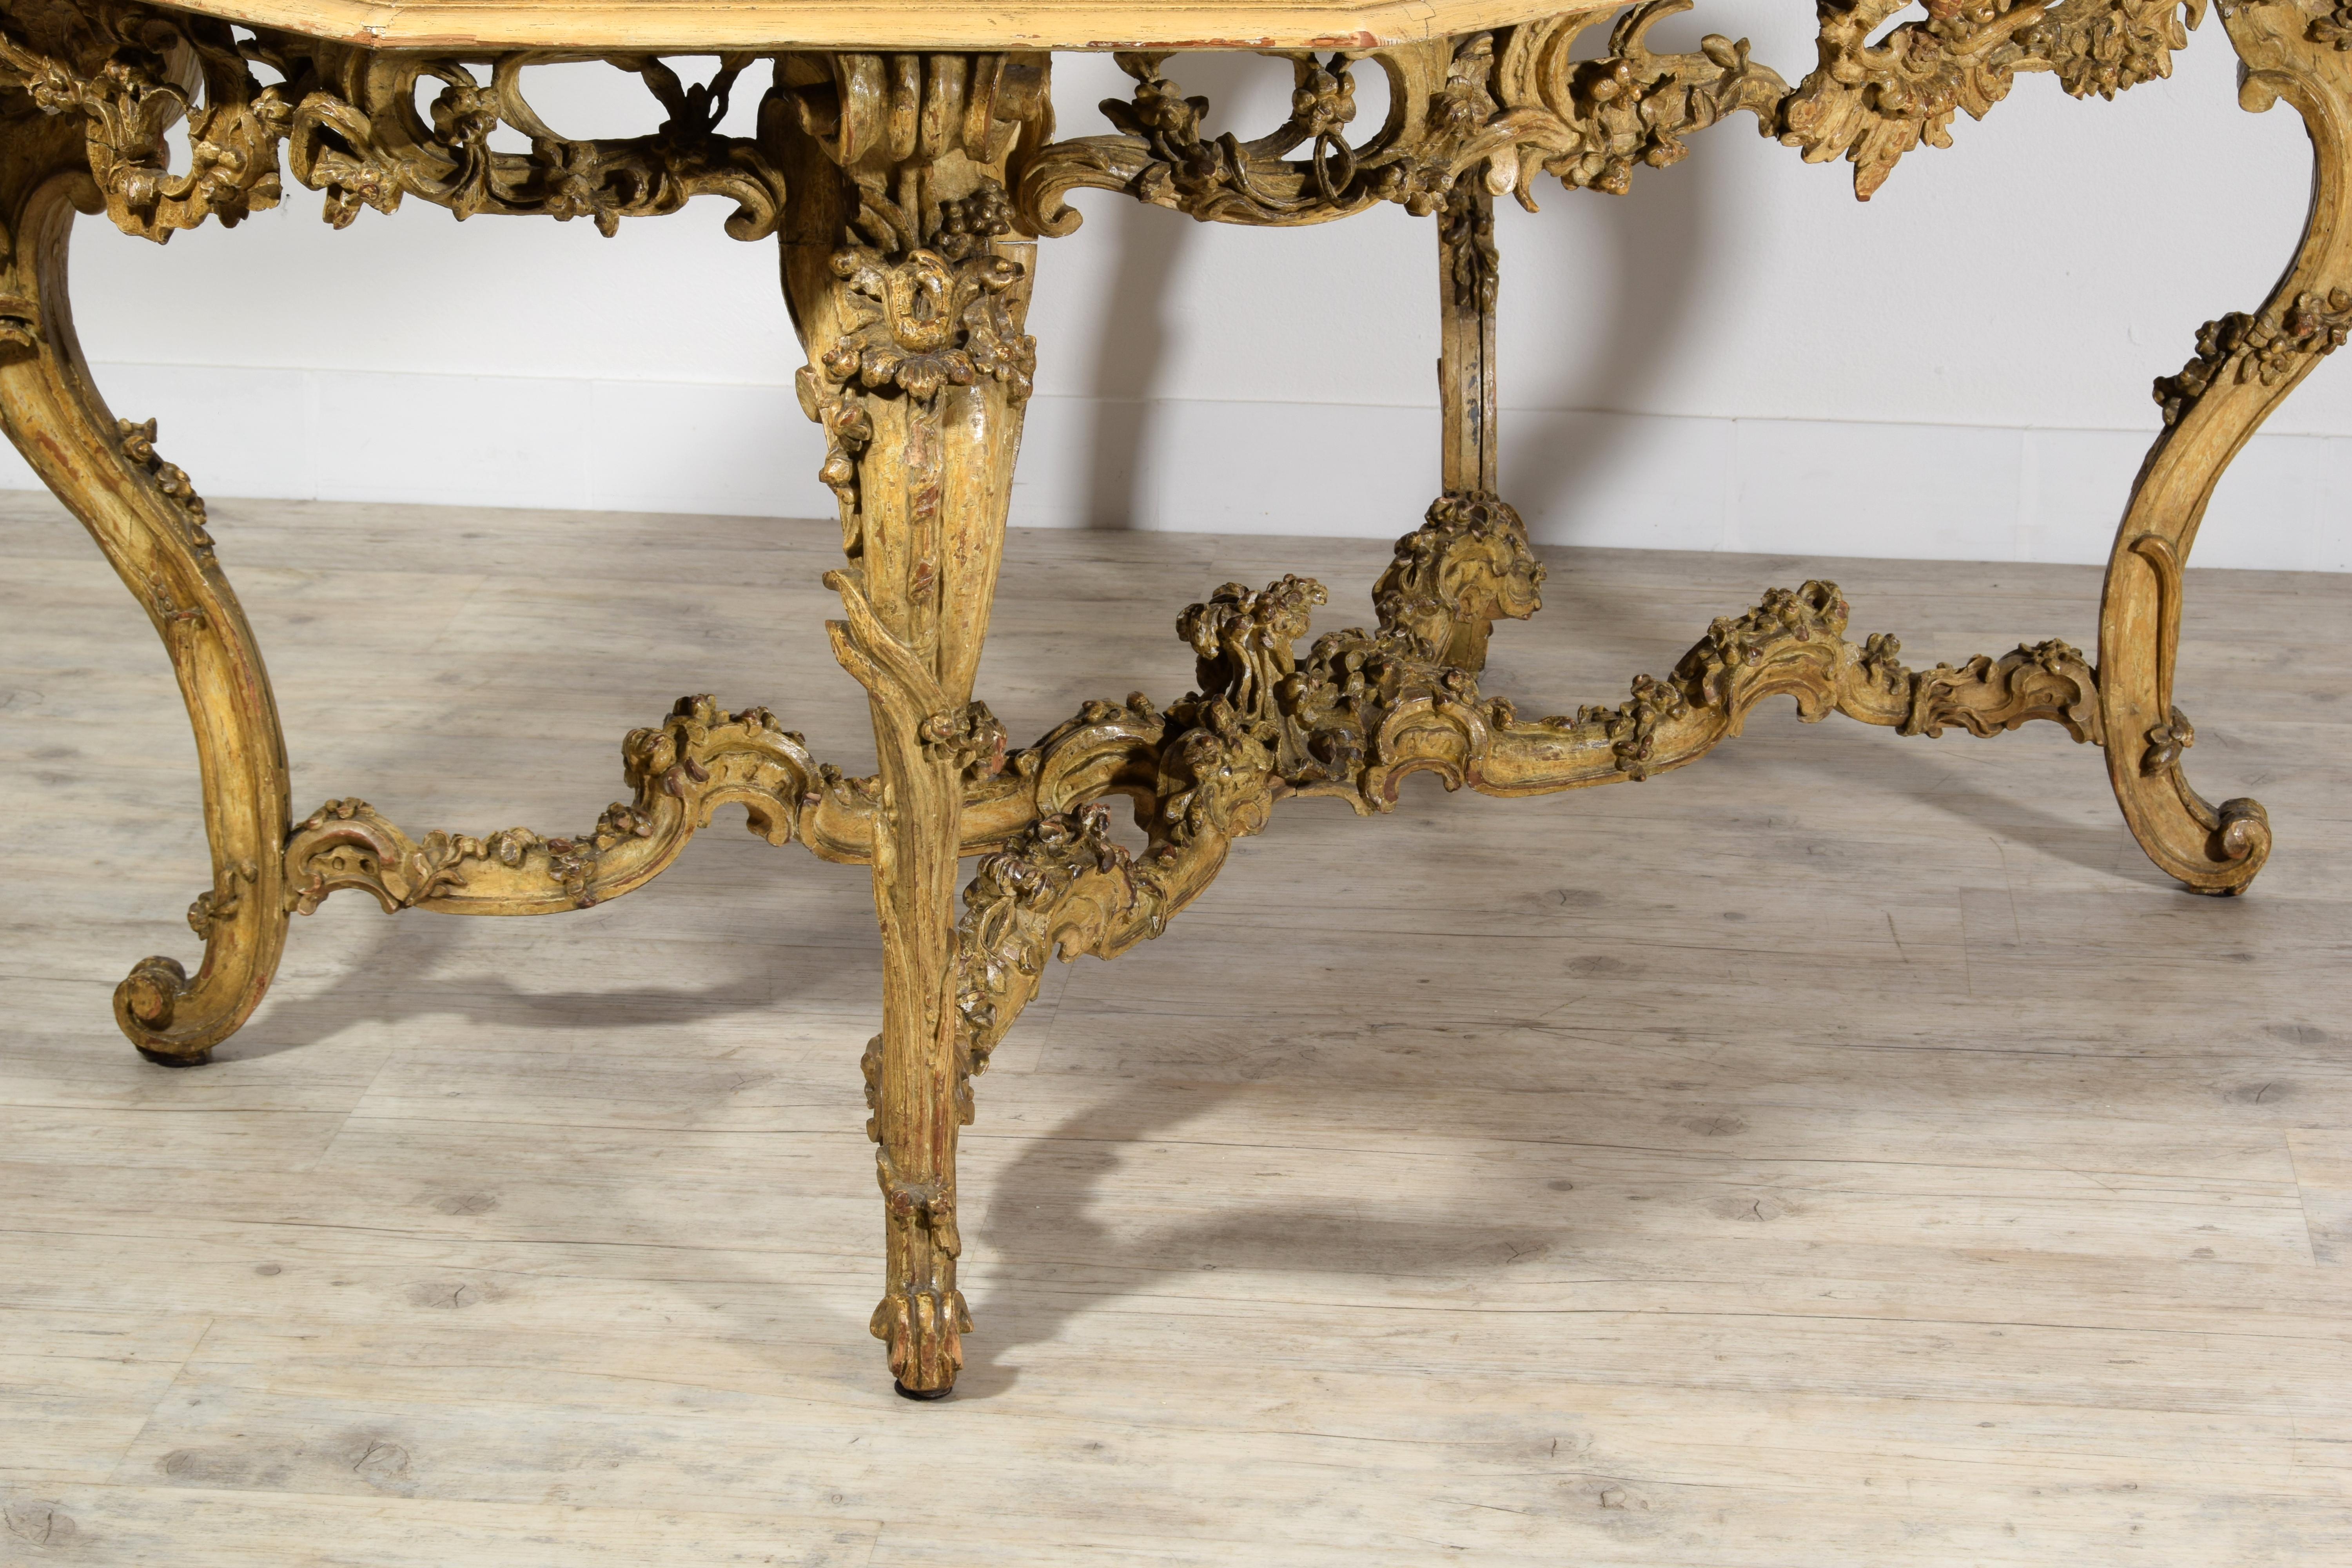 Italian Baroque Carved Gilt and Lacquered Wood Center Table, 18th Century For Sale 12